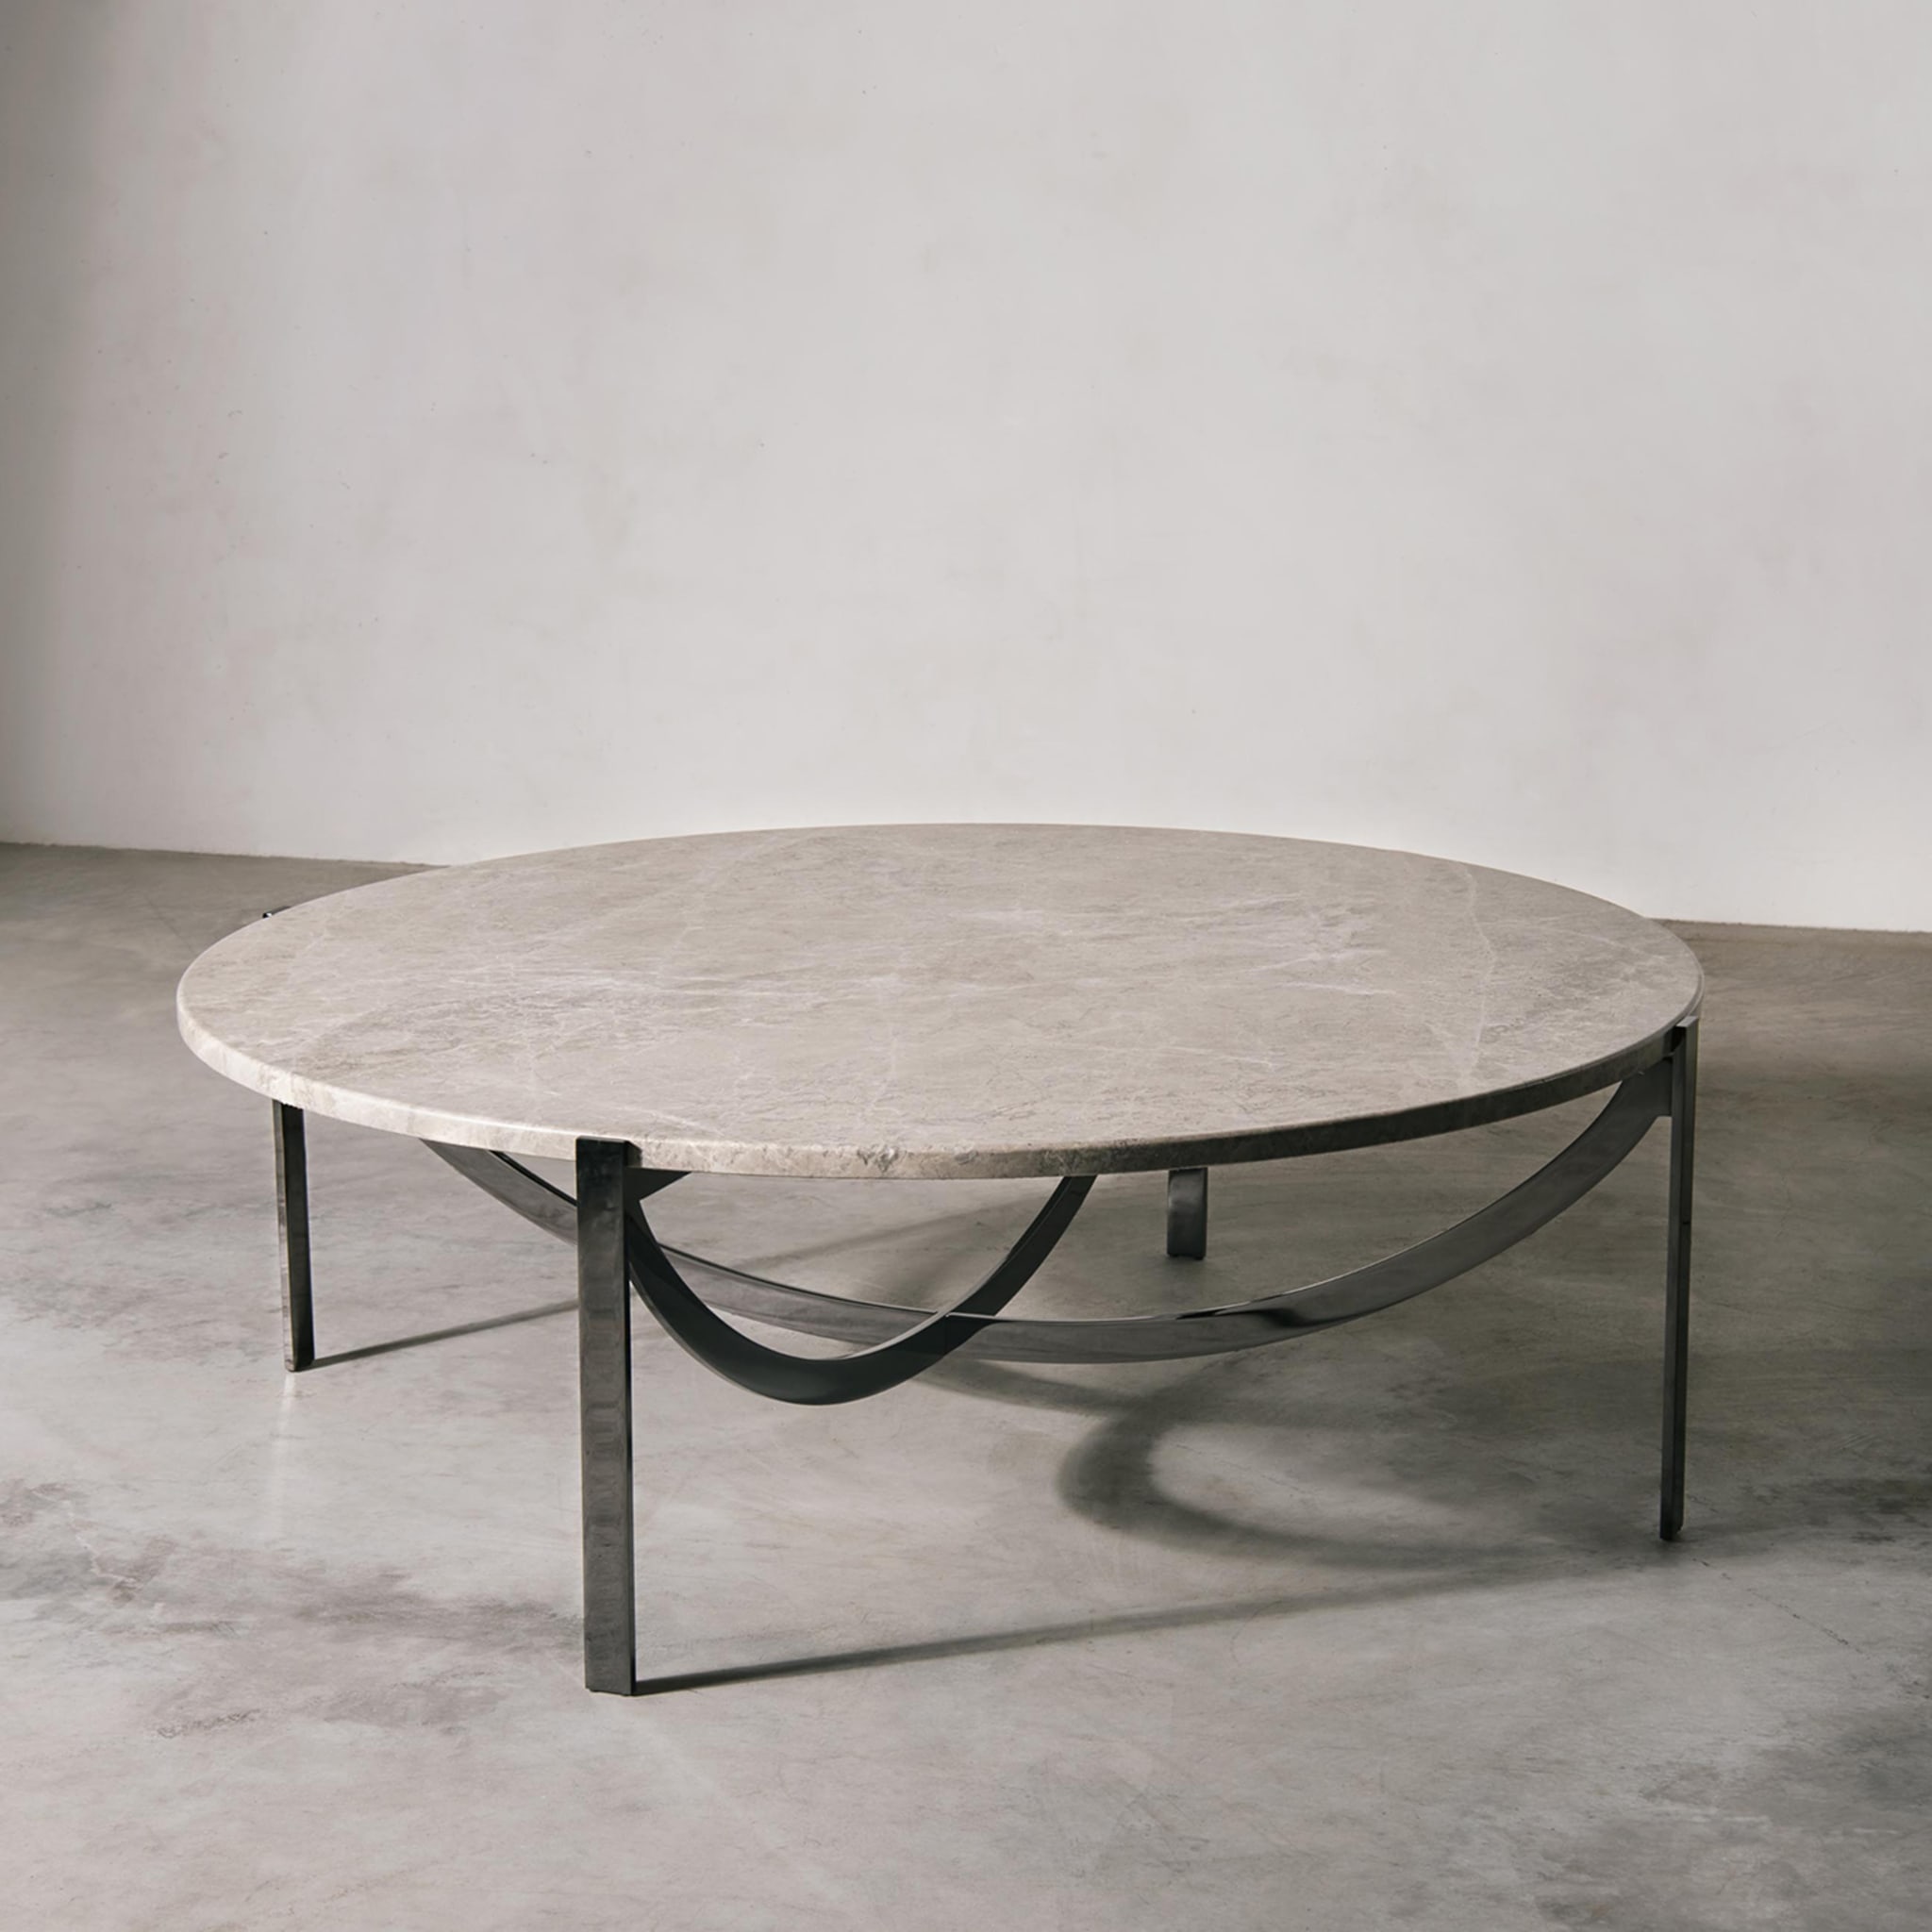 Astra Chrome Coffee Table by Patrick Norguet - Alternative view 2